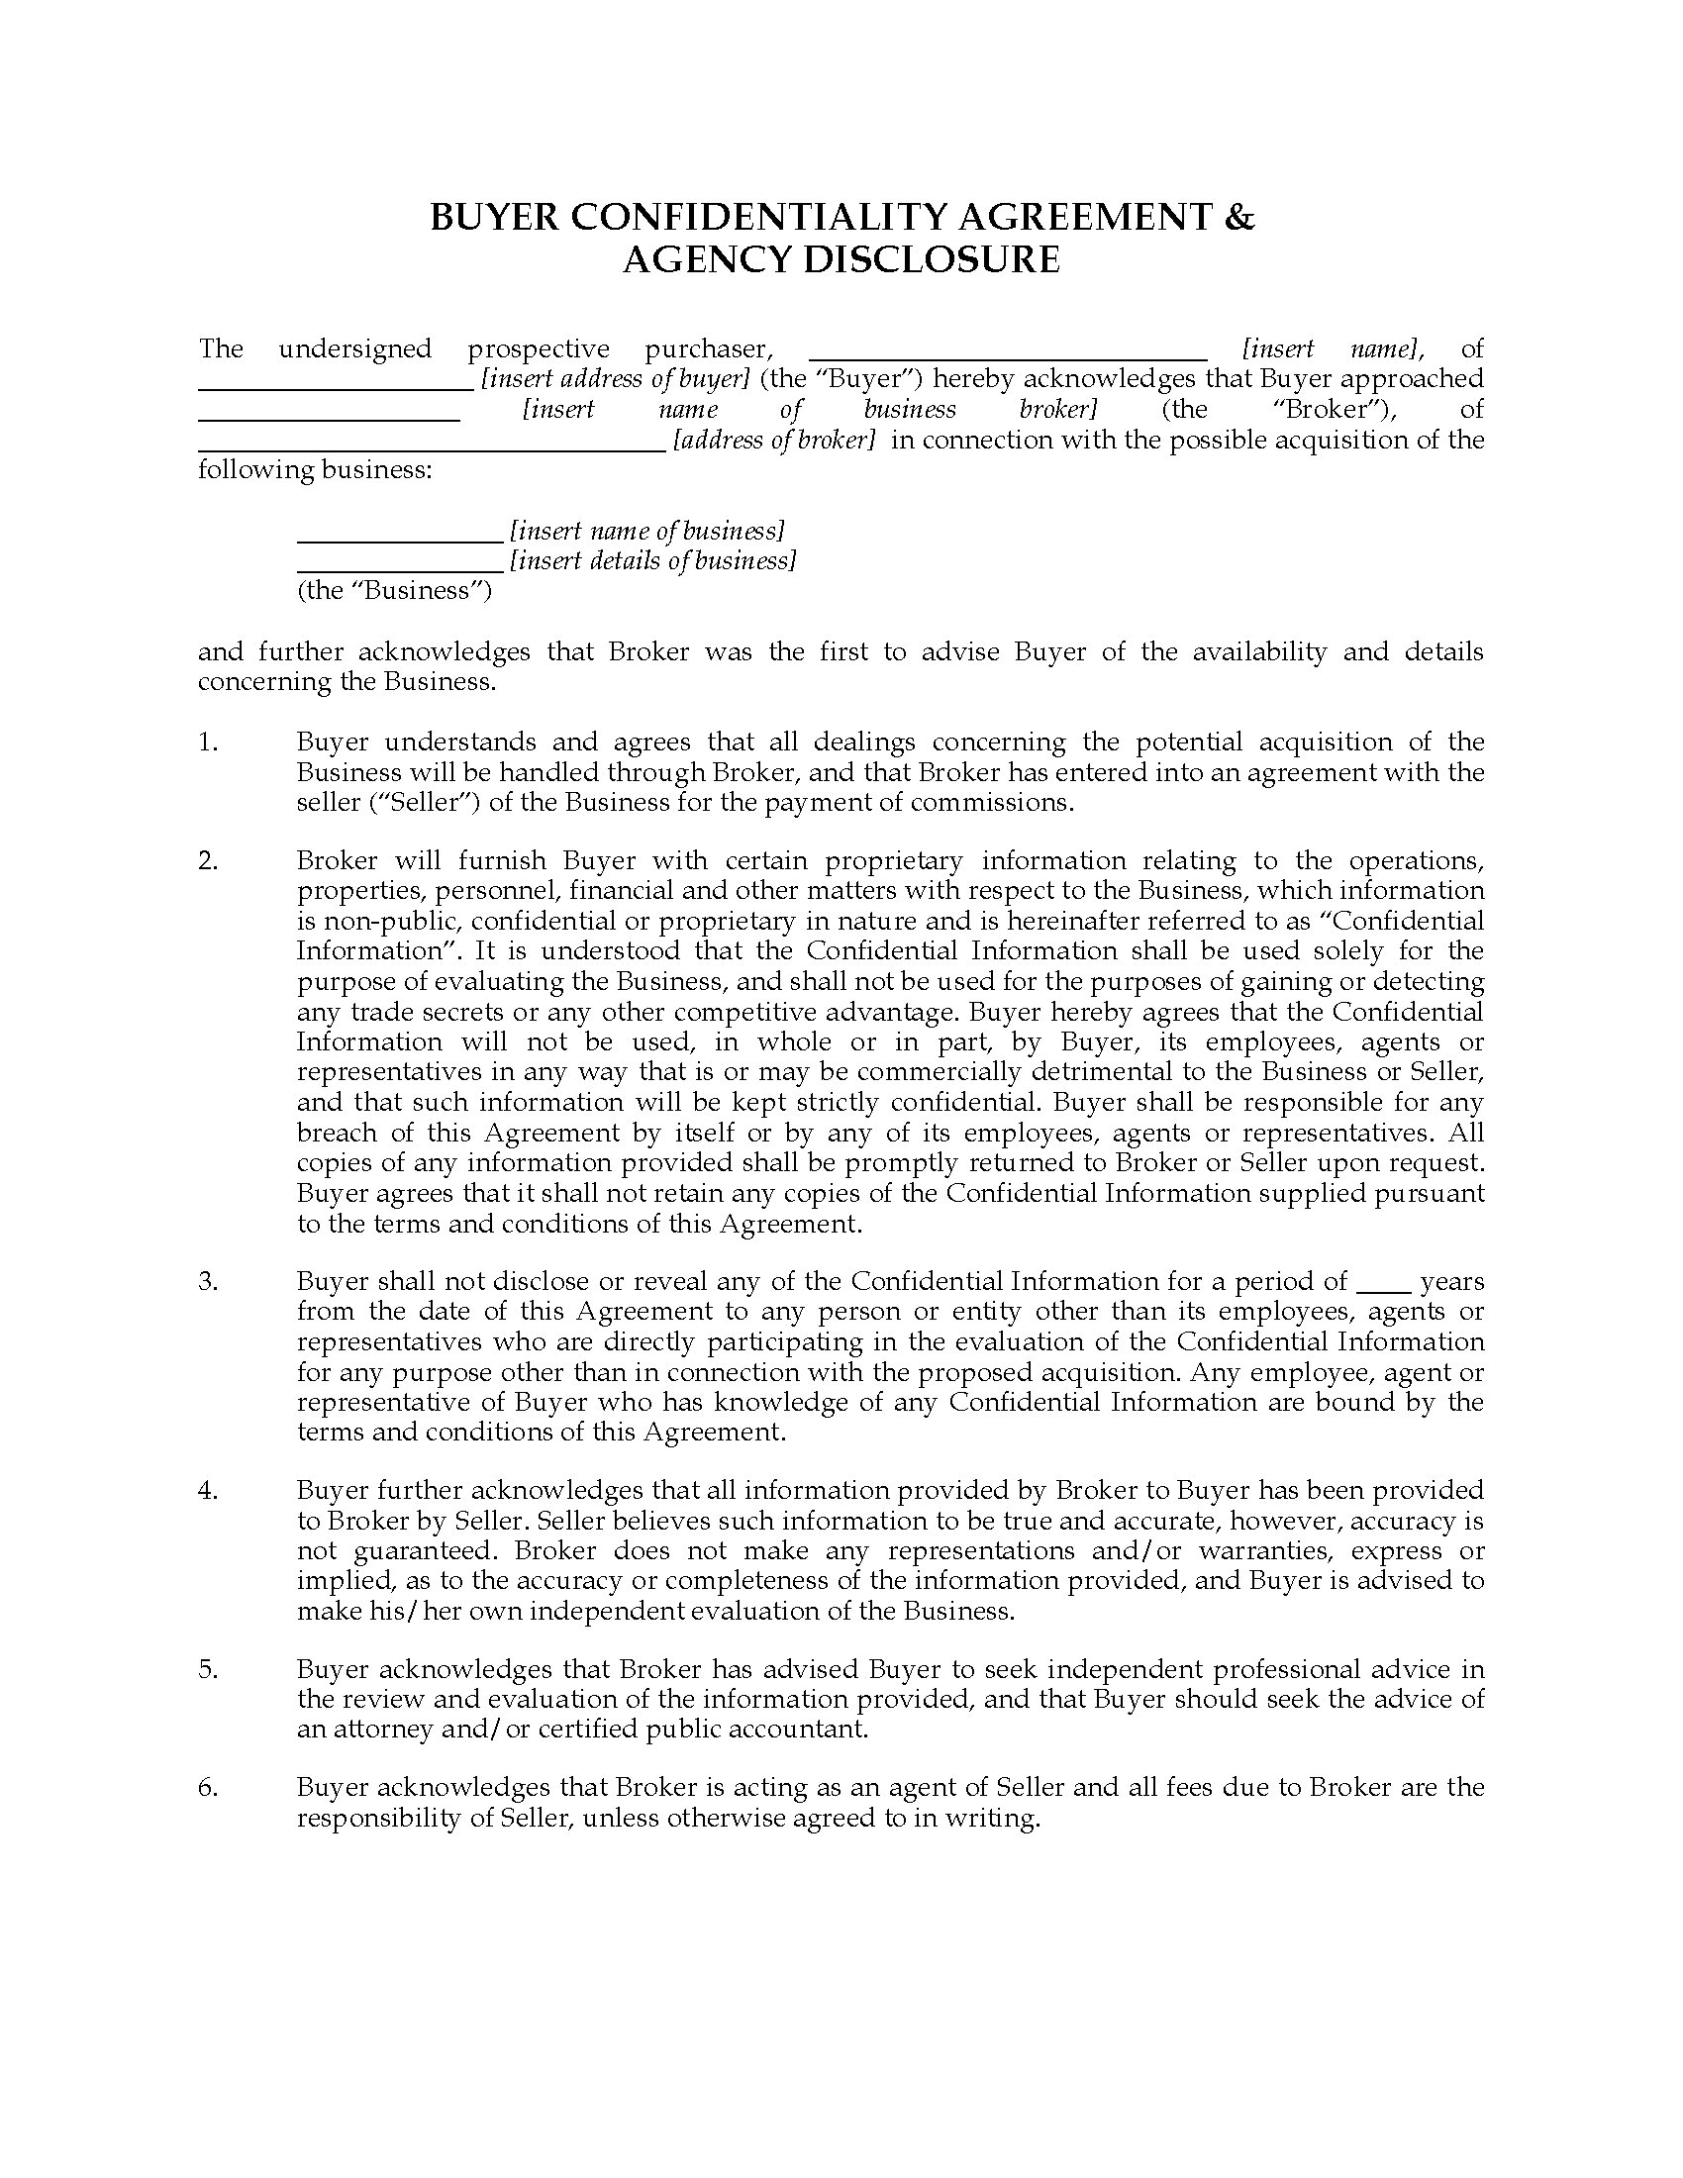 Confidentiality & Disclosure Agreement For Business Brokers | Legal Intended For Business Broker Agreement Template